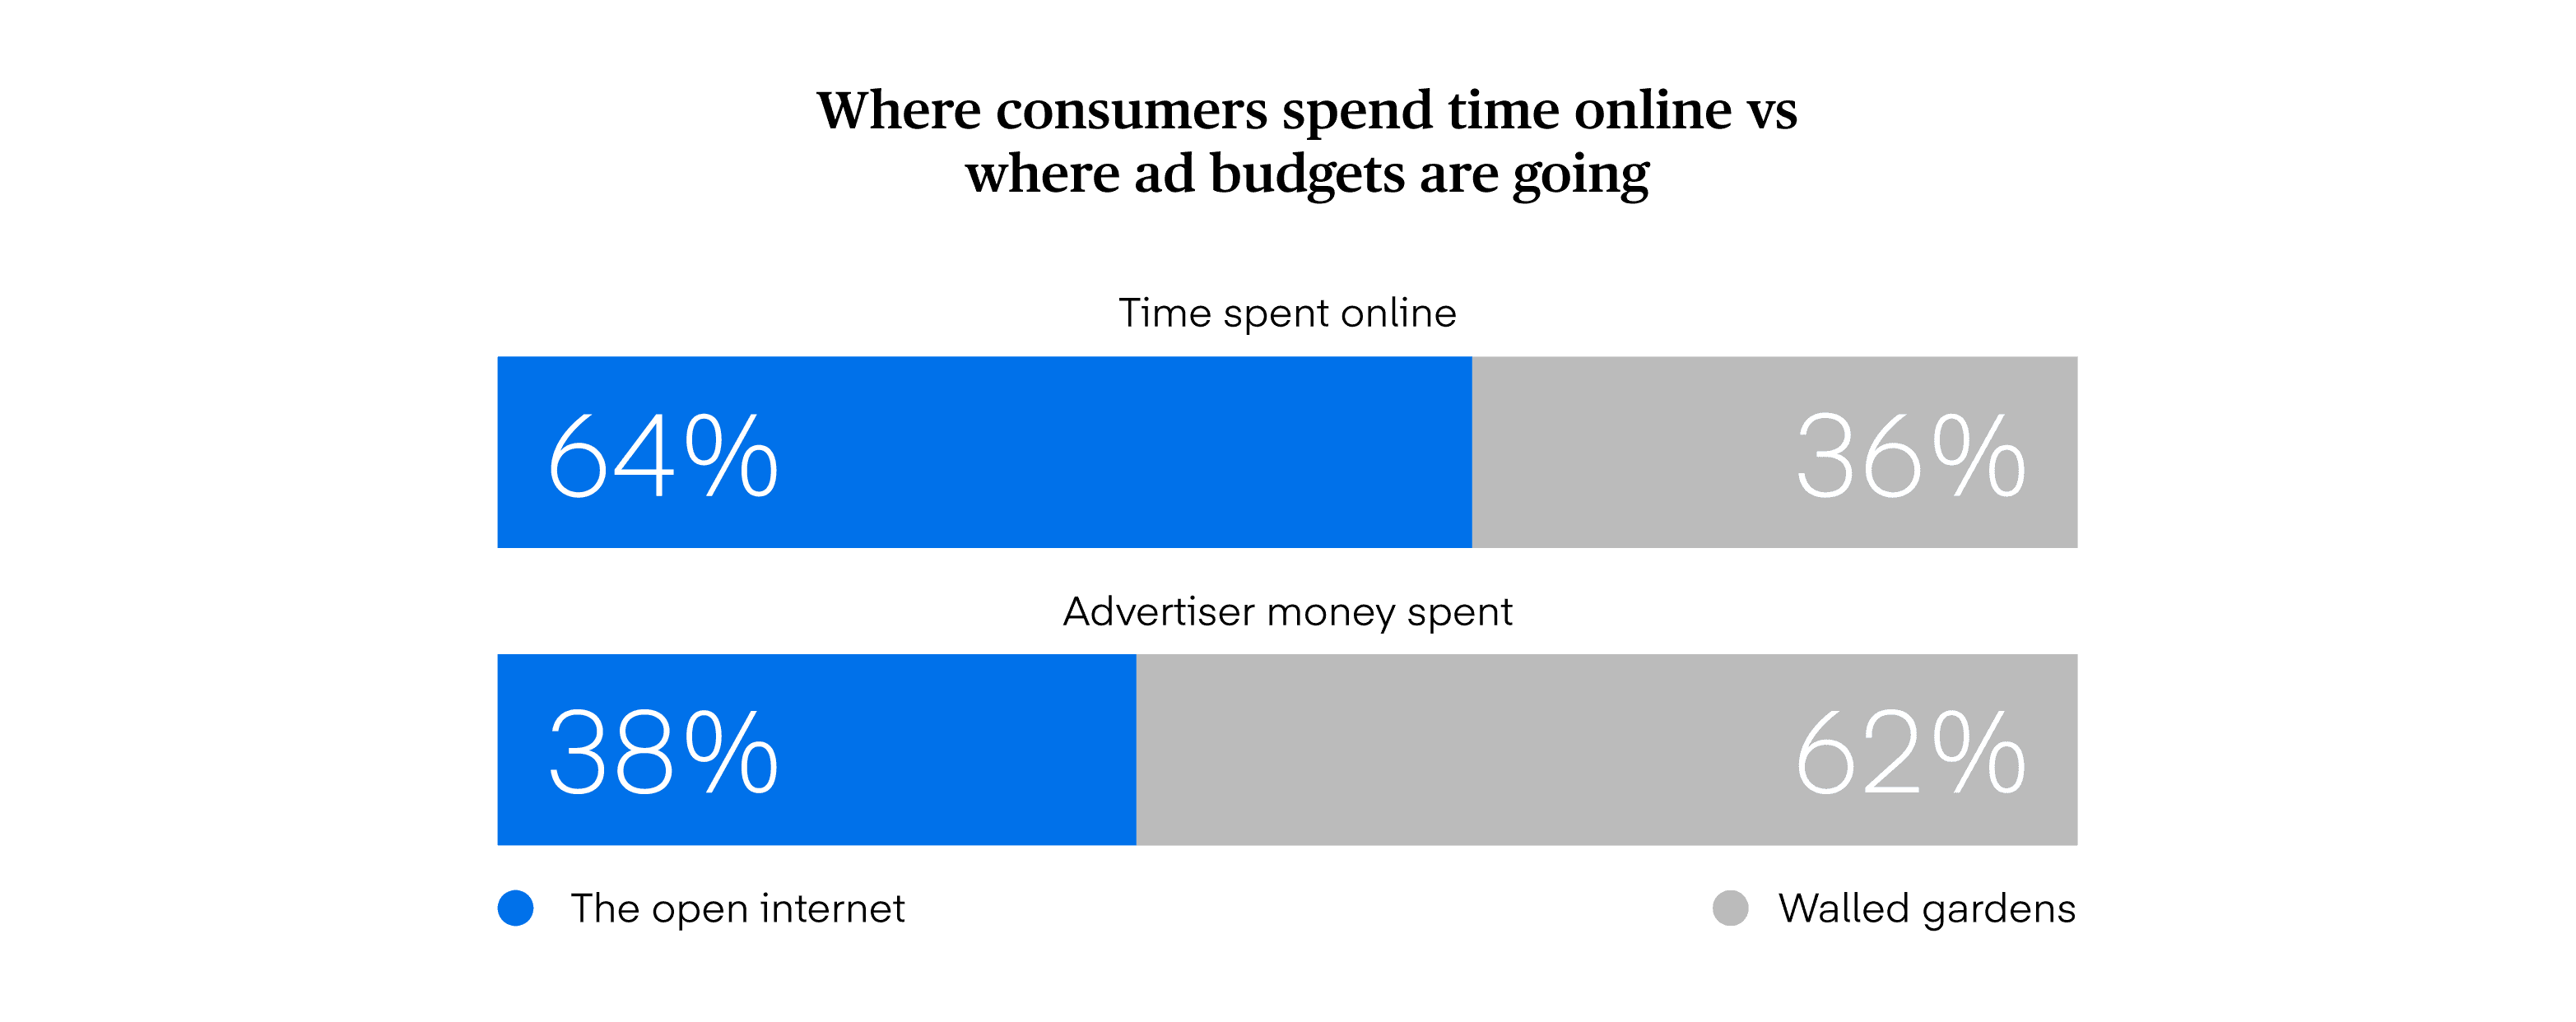 Data visualization displaying where Australian consumers spend time online vs where ad budgets are going